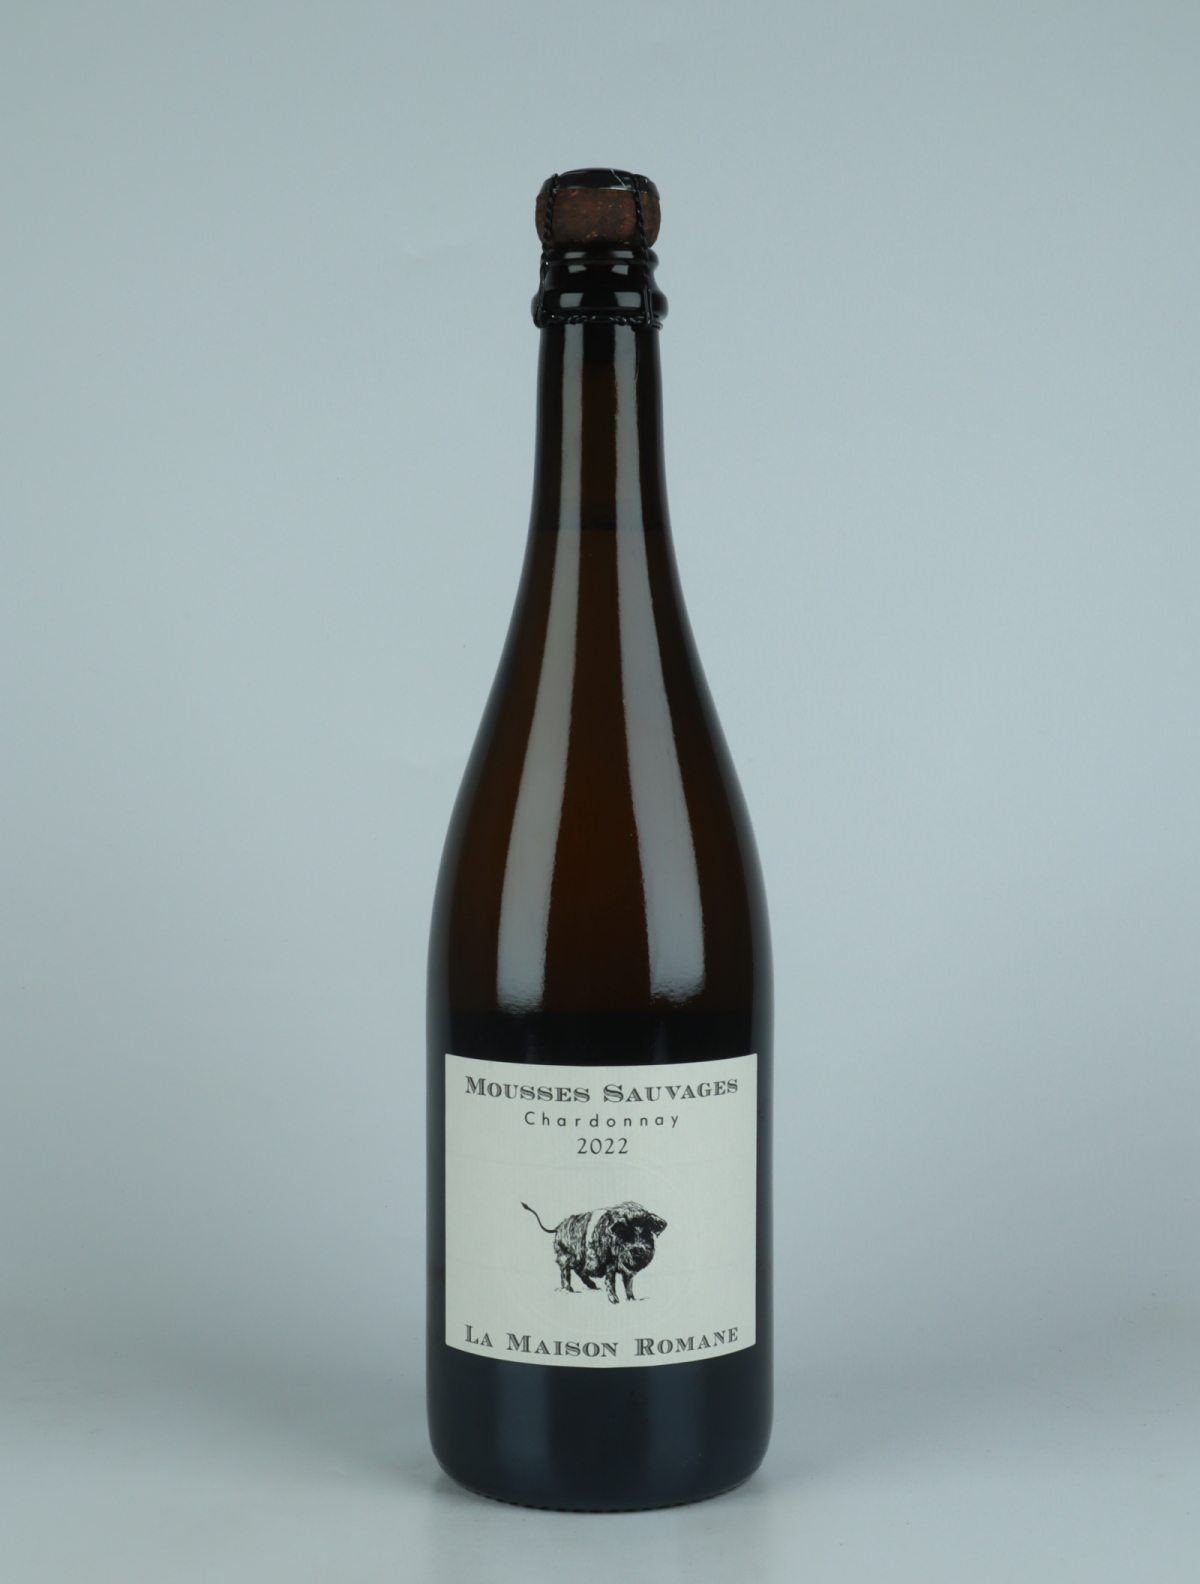 A bottle 2022 Mousses Sauvages Chardonnay Beer from La Maison Romane, Burgundy in France